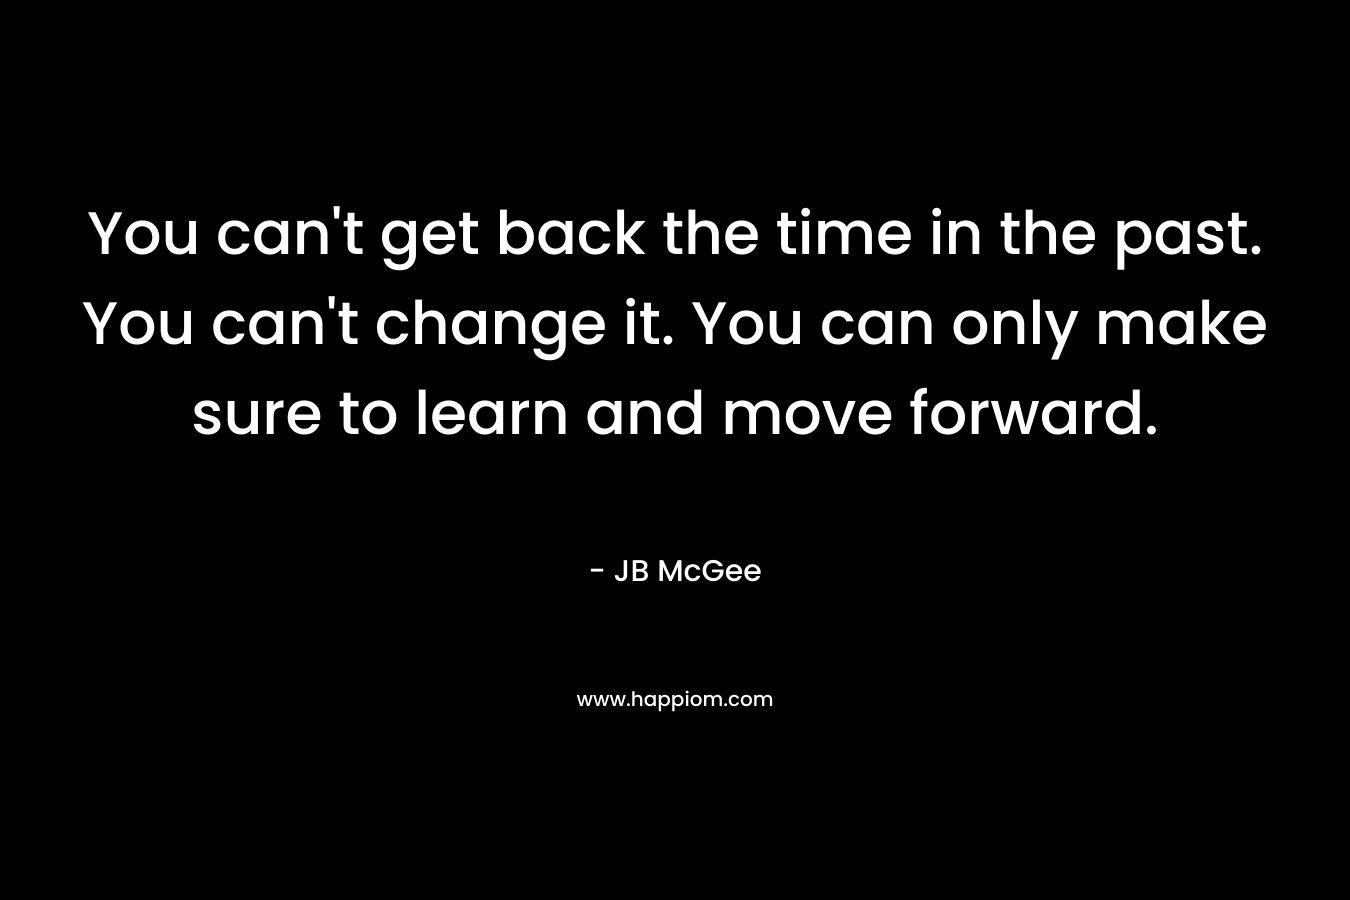 You can't get back the time in the past. You can't change it. You can only make sure to learn and move forward.